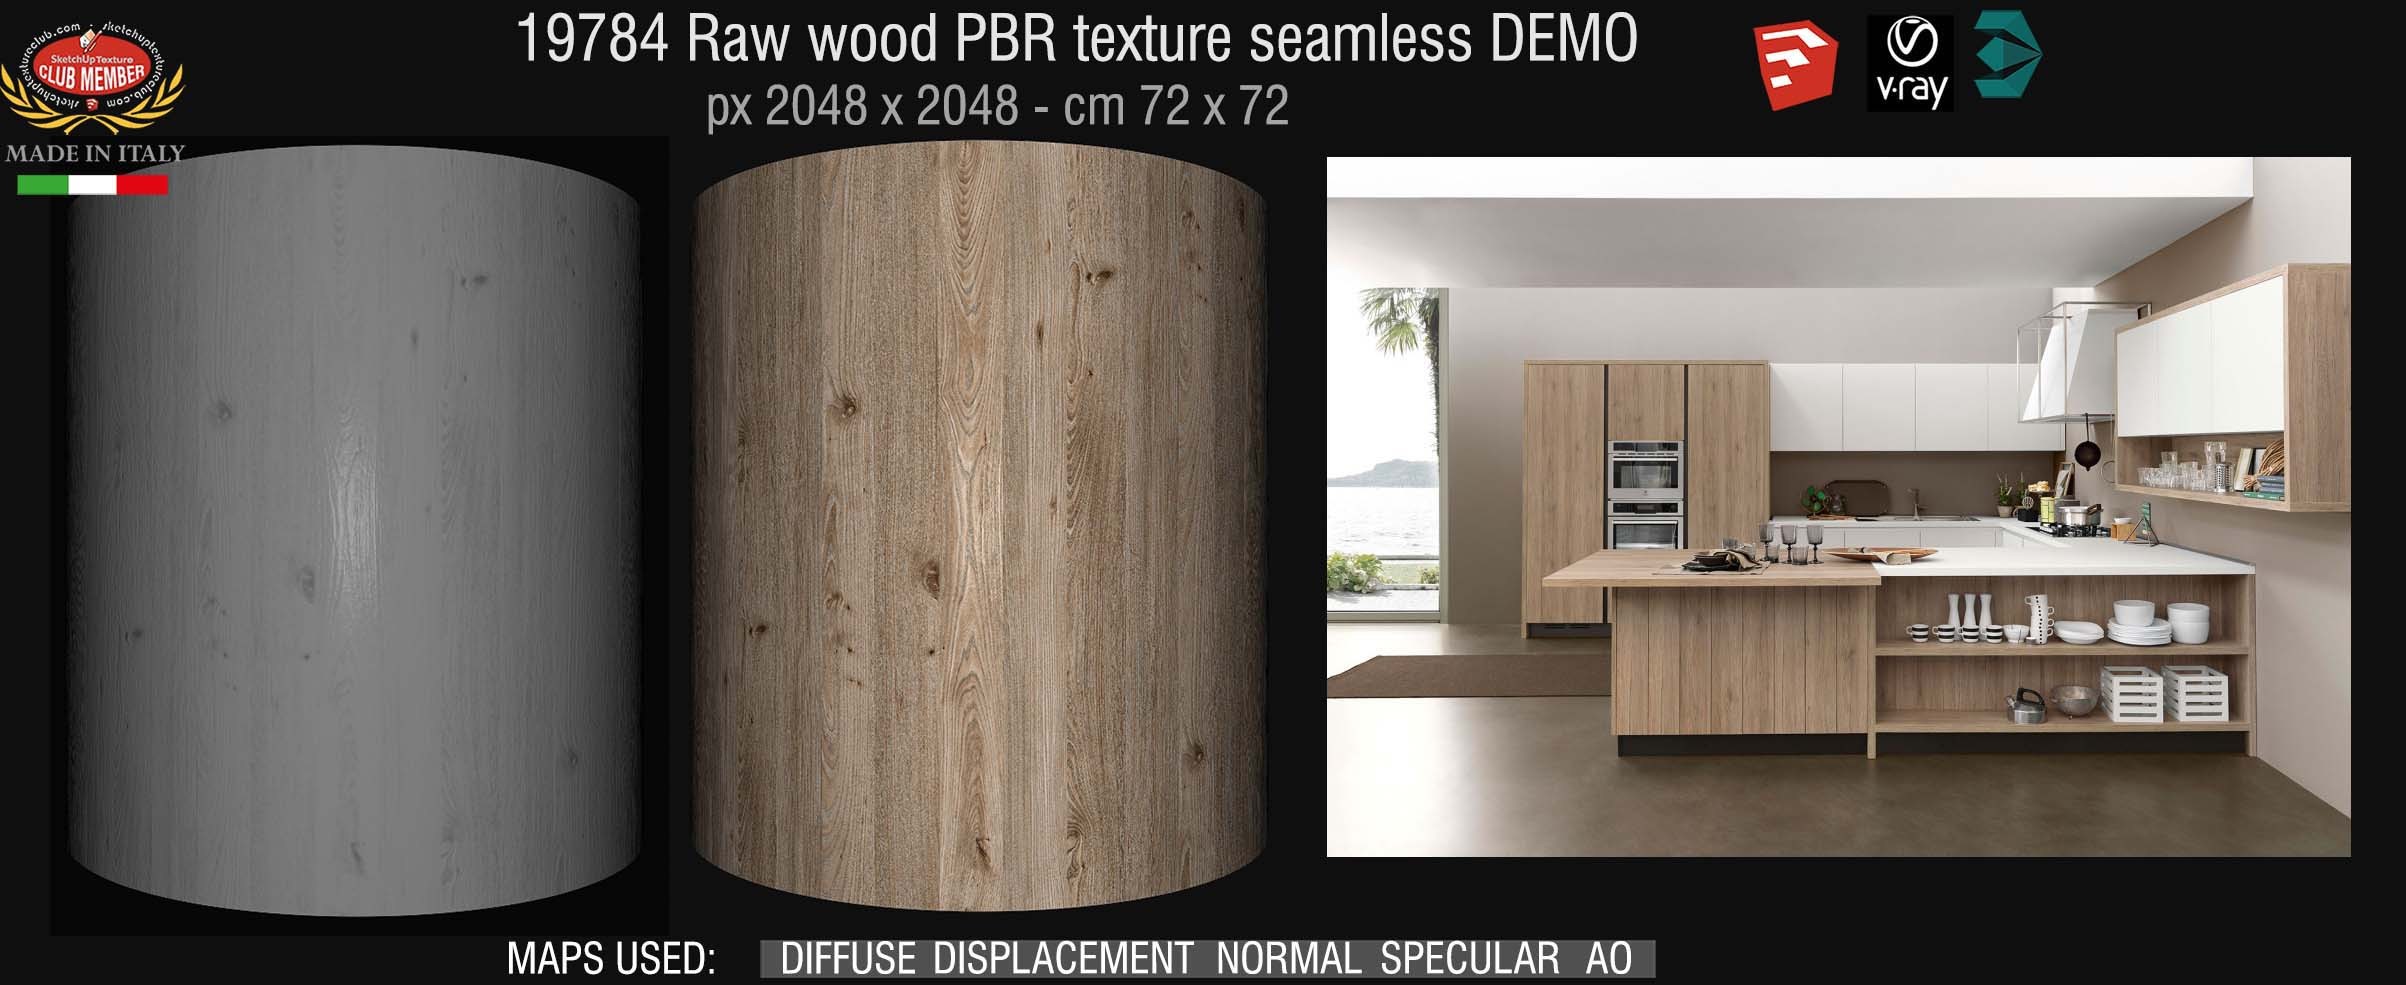 19784 Raw wood surface PBR texture seamless DEMO